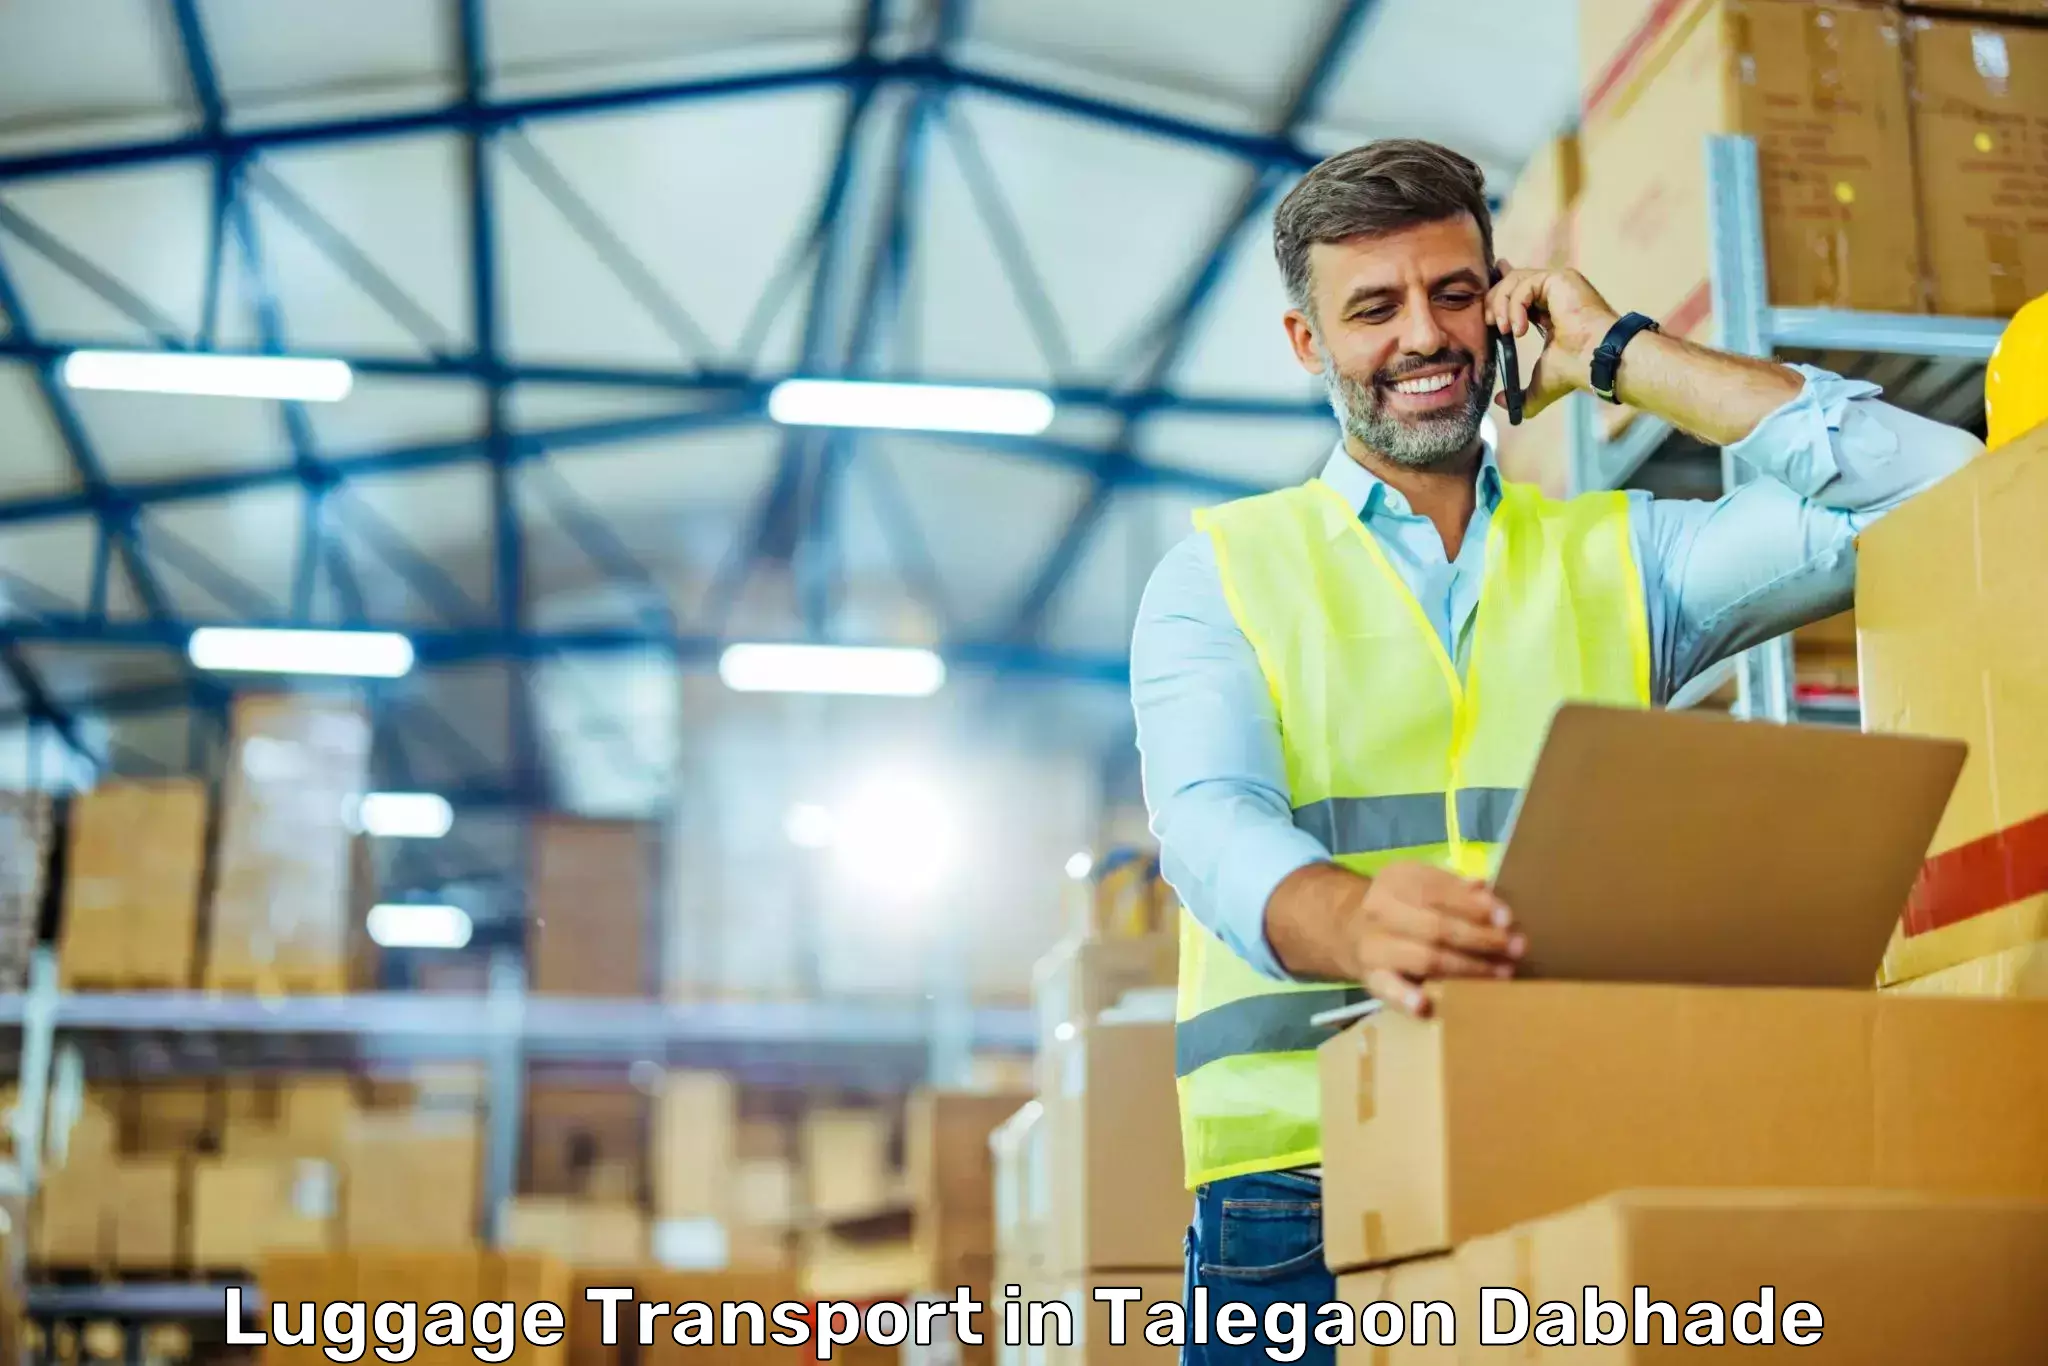 Baggage transport cost in Talegaon Dabhade